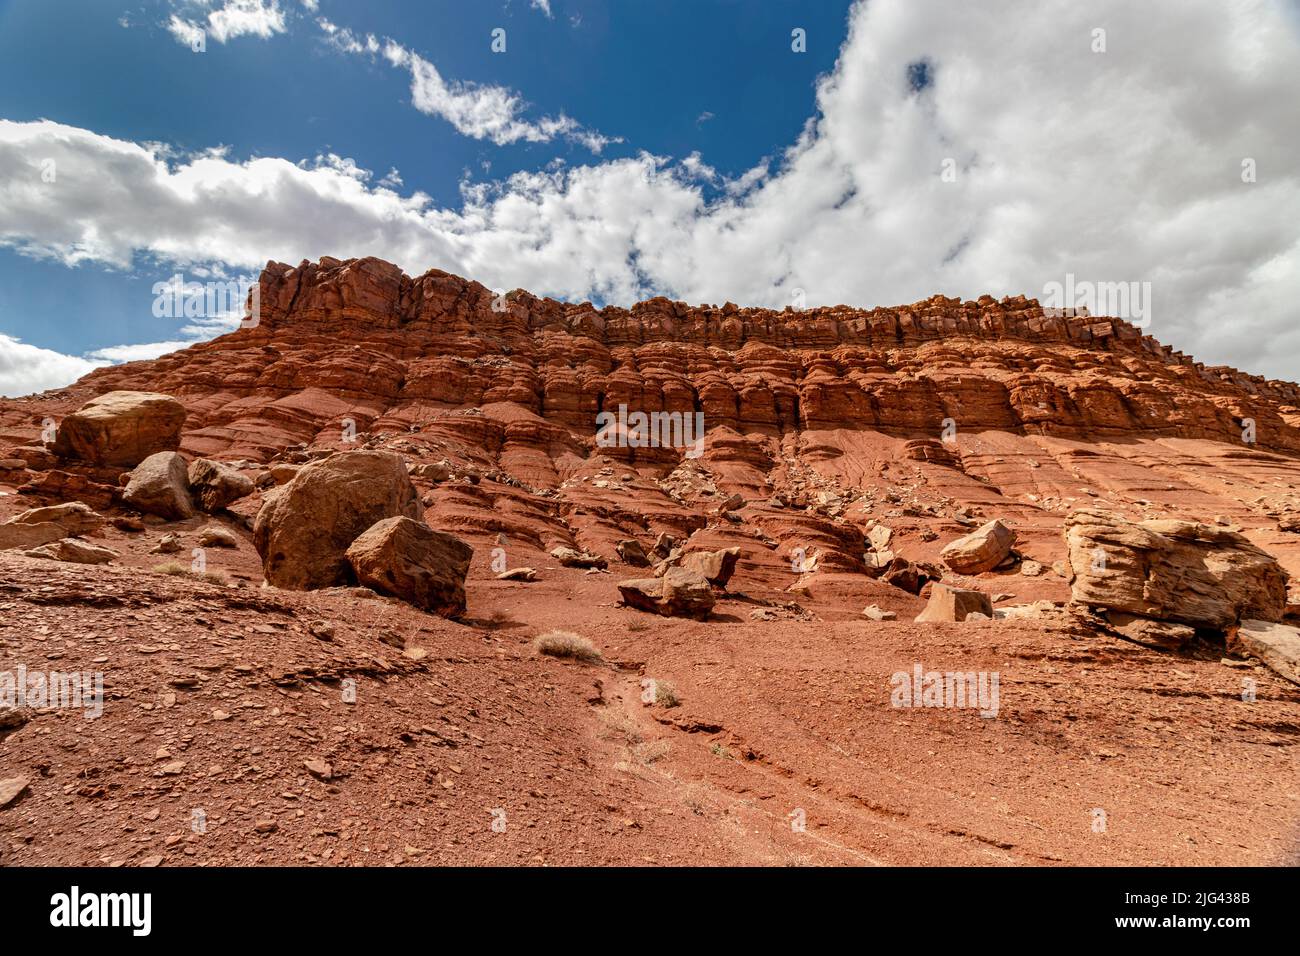 Will these rocks roll down the hill? Vermillion cliff range, Page, AZ, USA Stock Photo